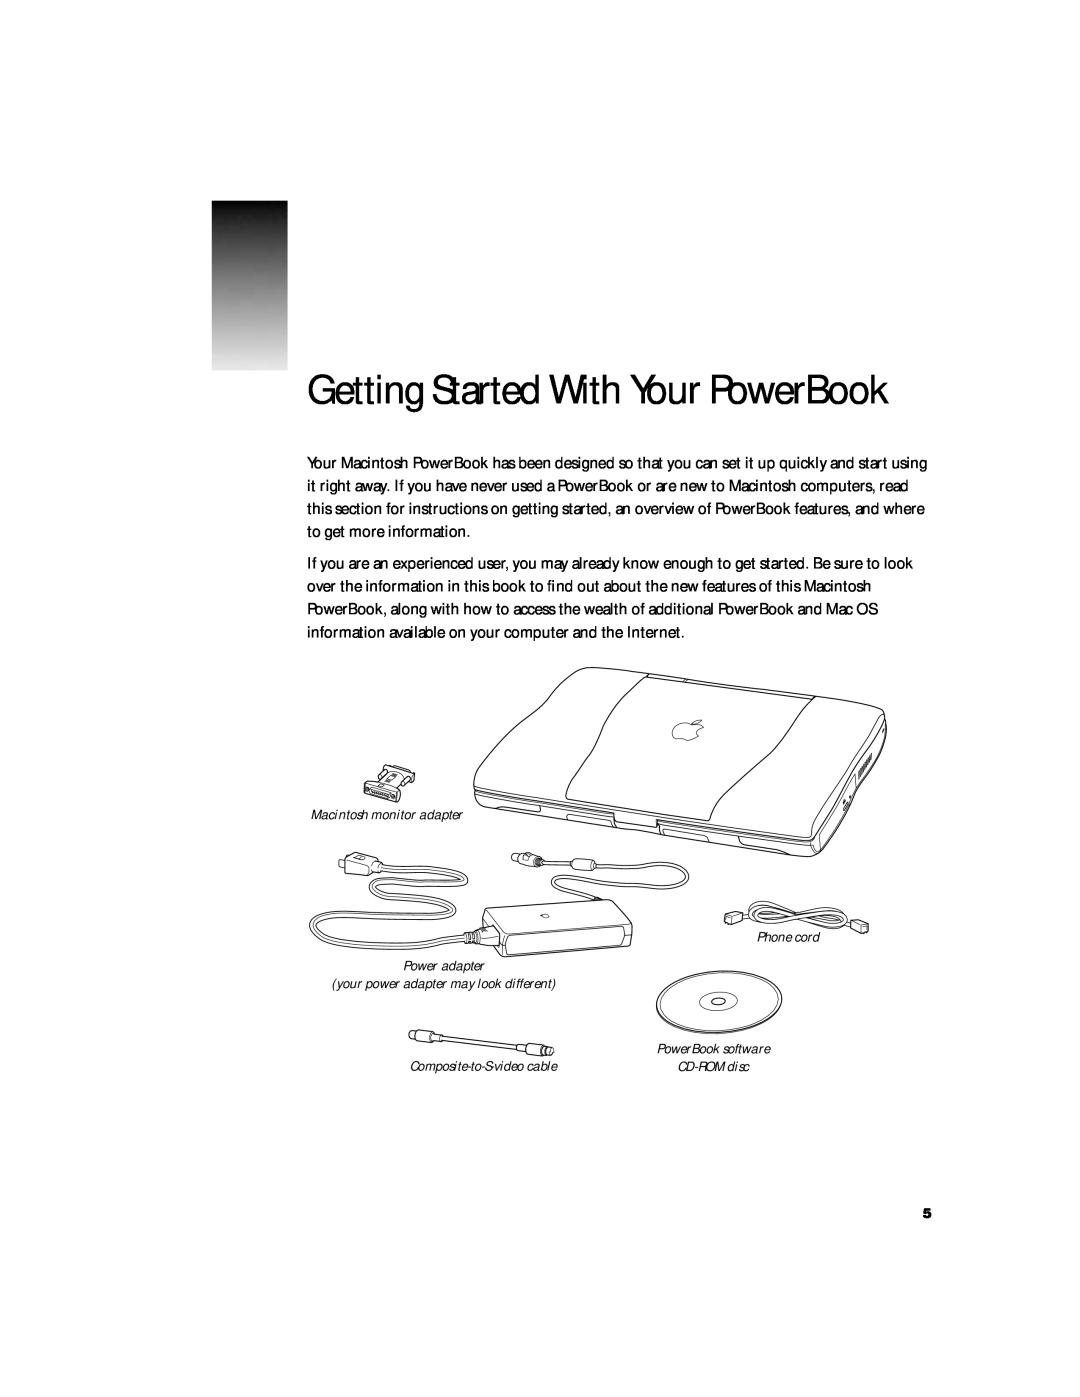 Apple G3 manual Getting Started With Your PowerBook, Macintosh monitor adapter Phone cord Power adapter 